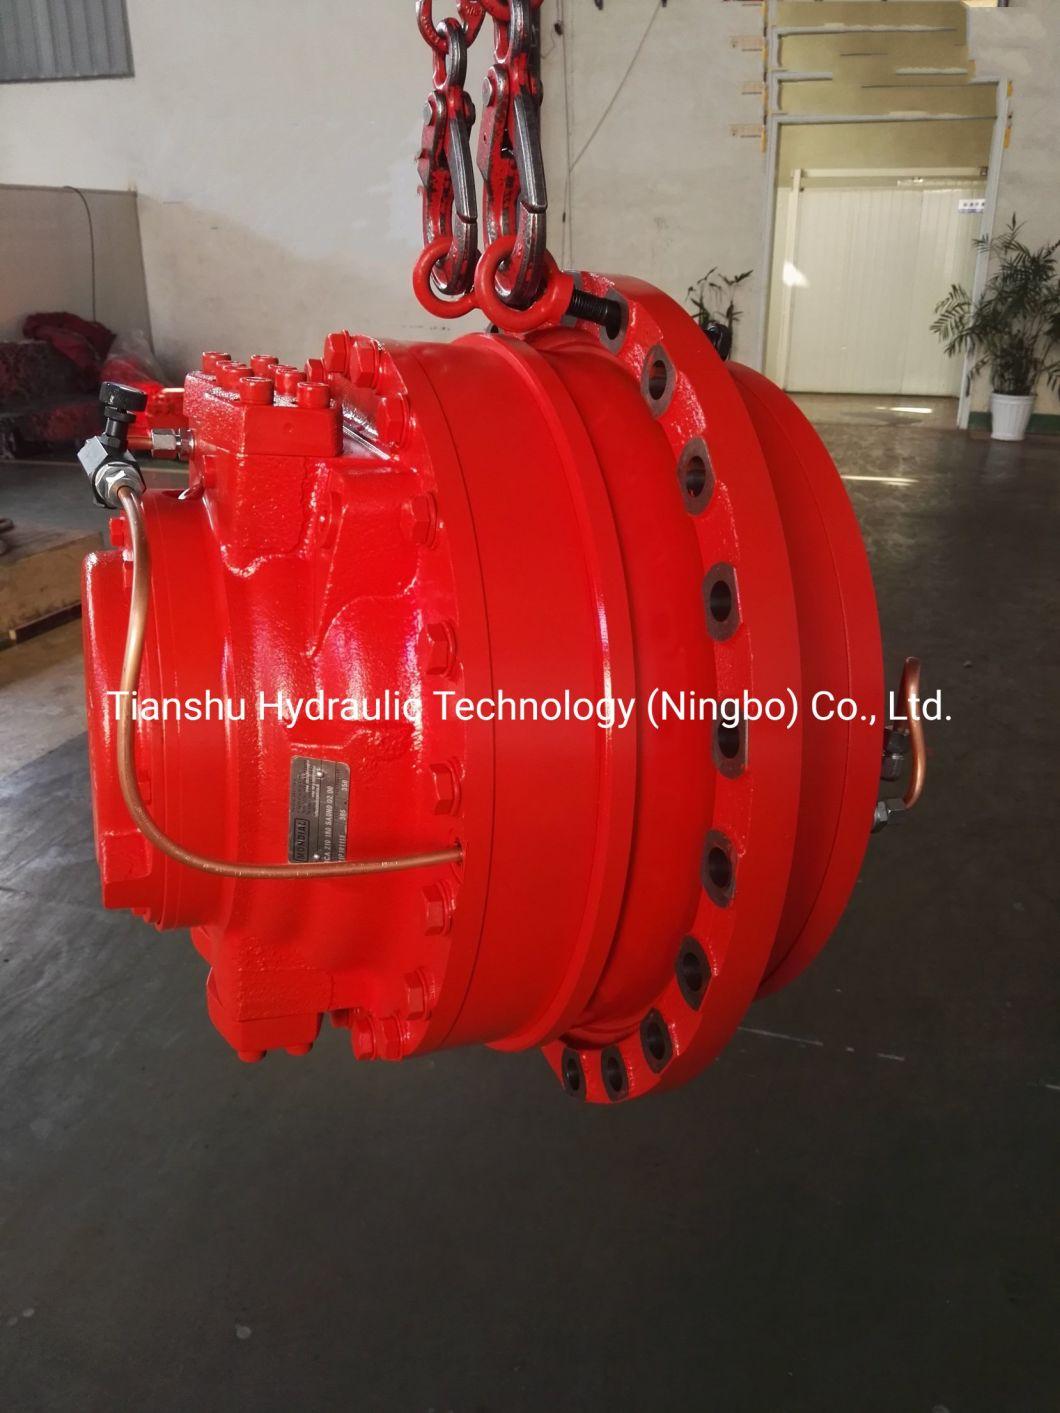 China Made Hagglunds Compact Hydraulic Motor Piston Type Plunger Type Hydraulic Power Pack Ca70 Ca0n00 02.